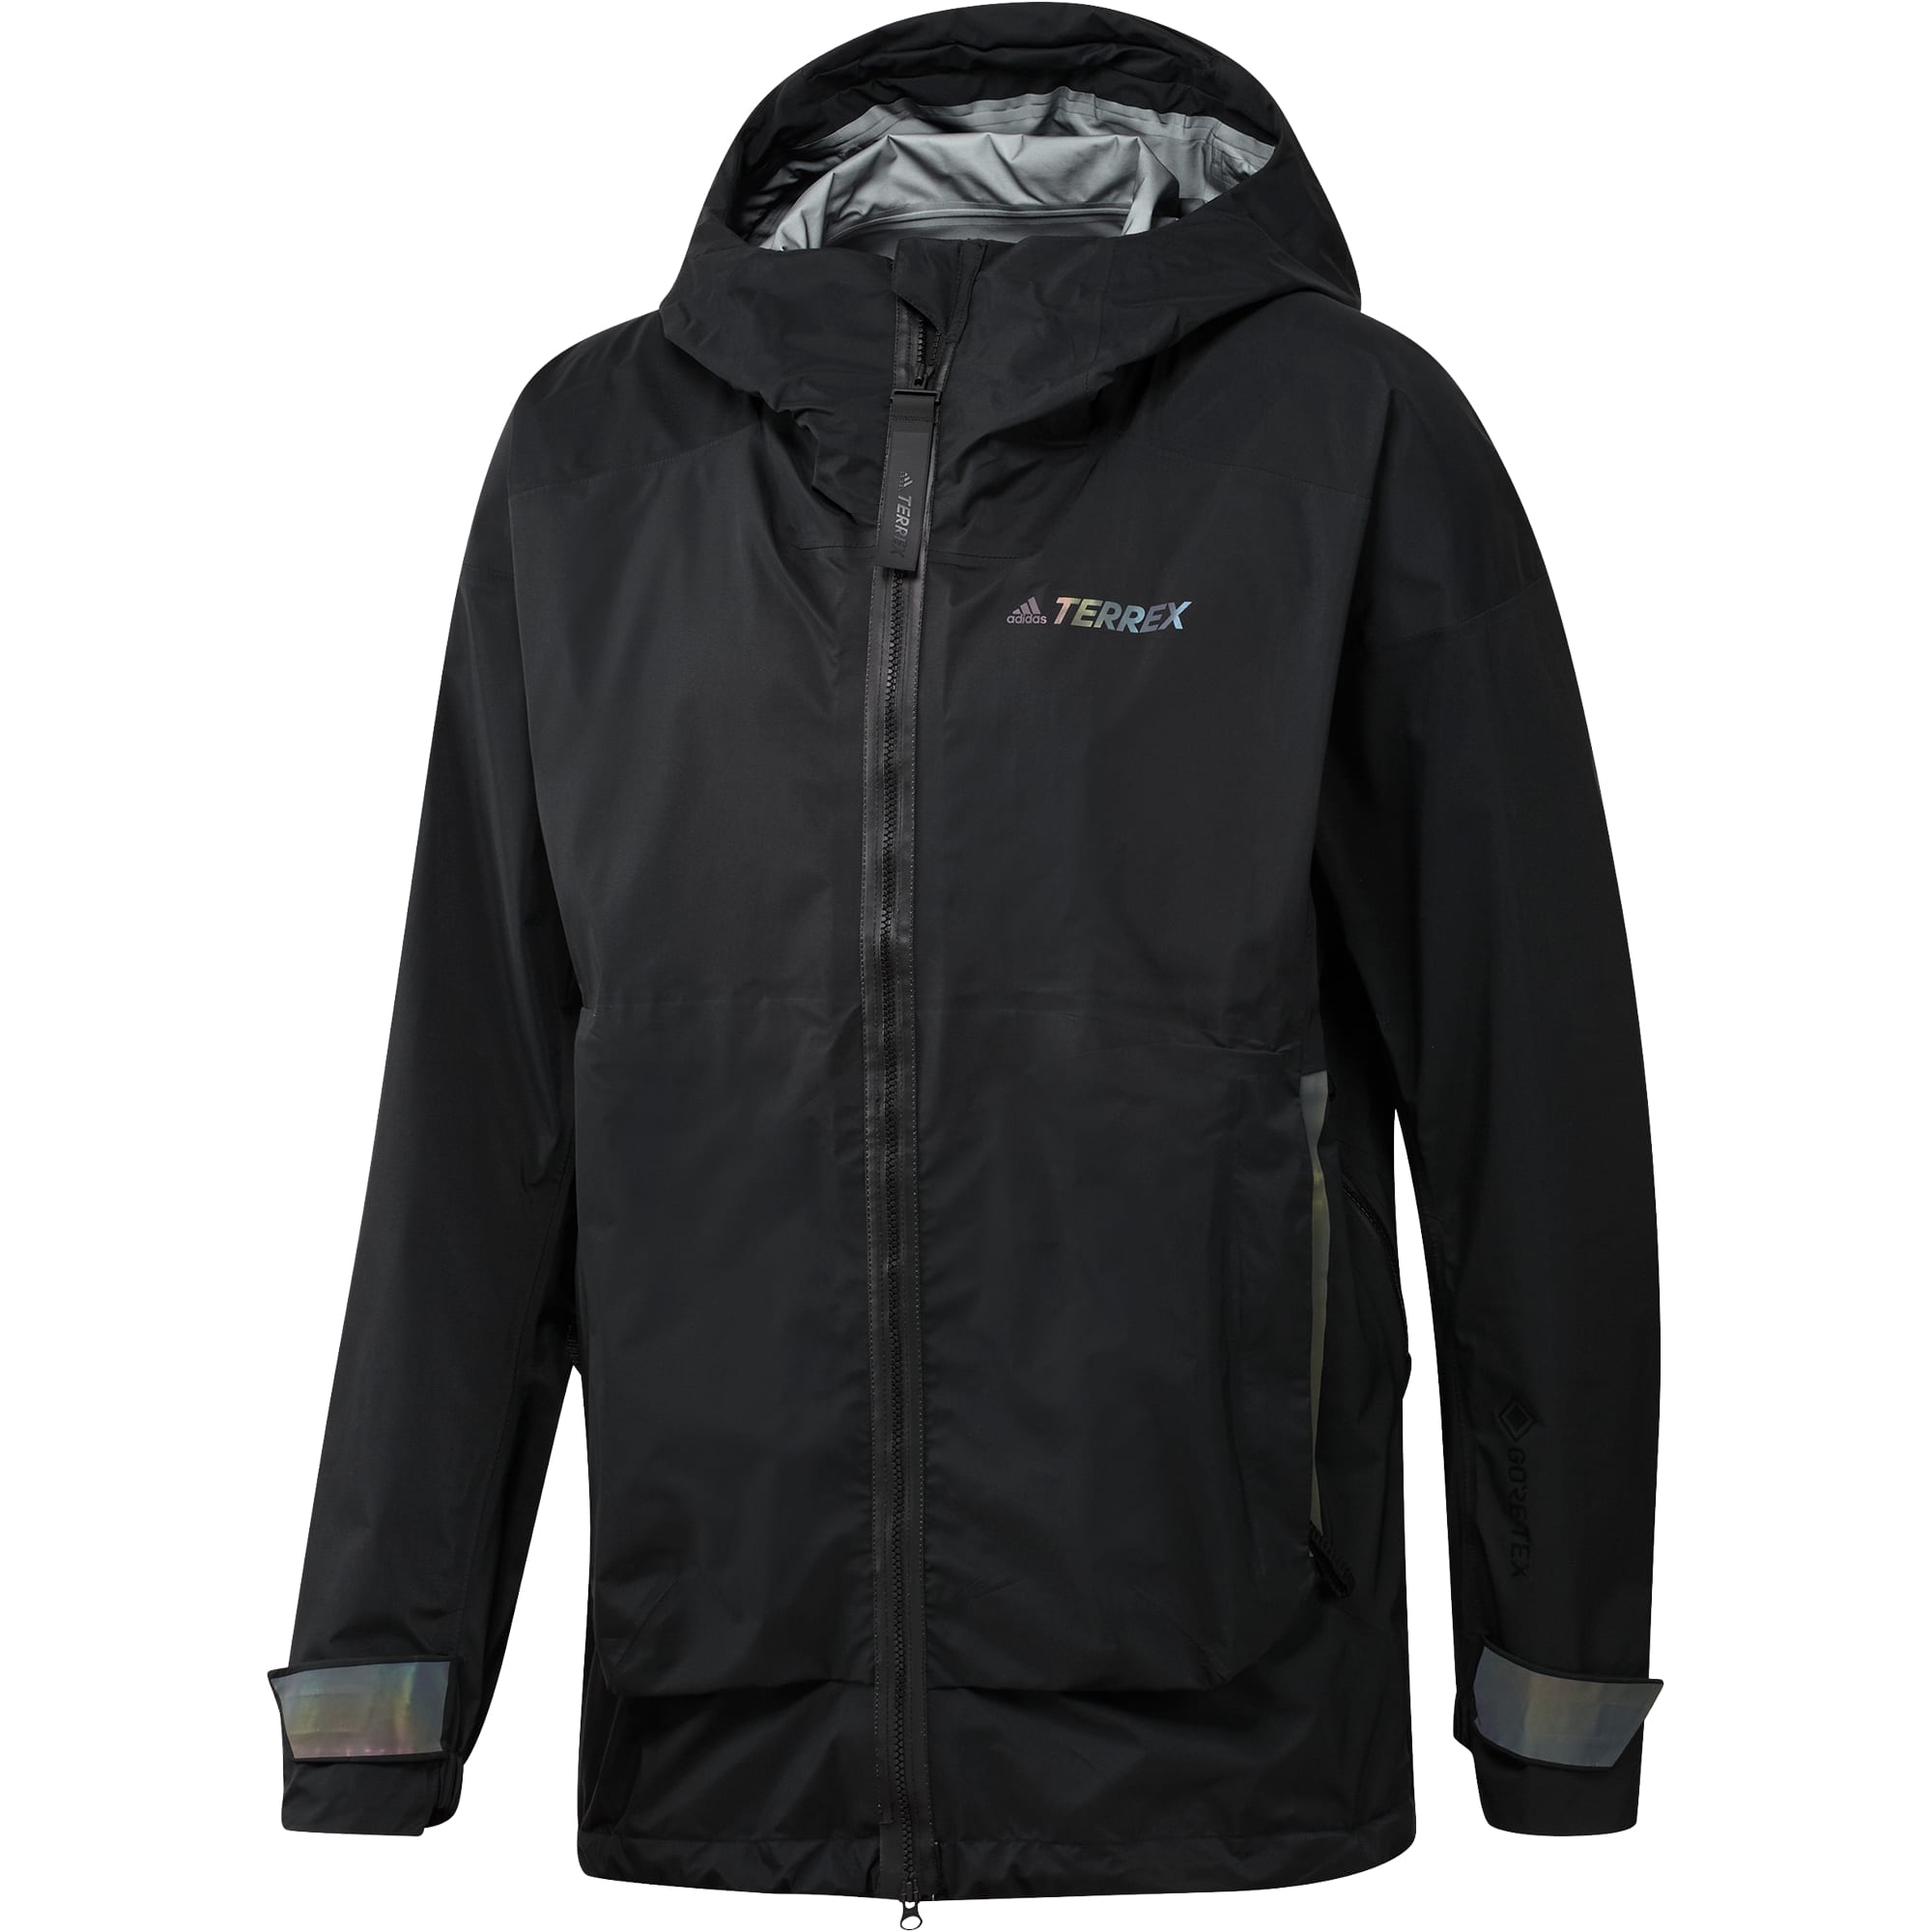 Buy Adidas Men's Terrex MyShelter Gore-Tex Active Jacket from Outnorth